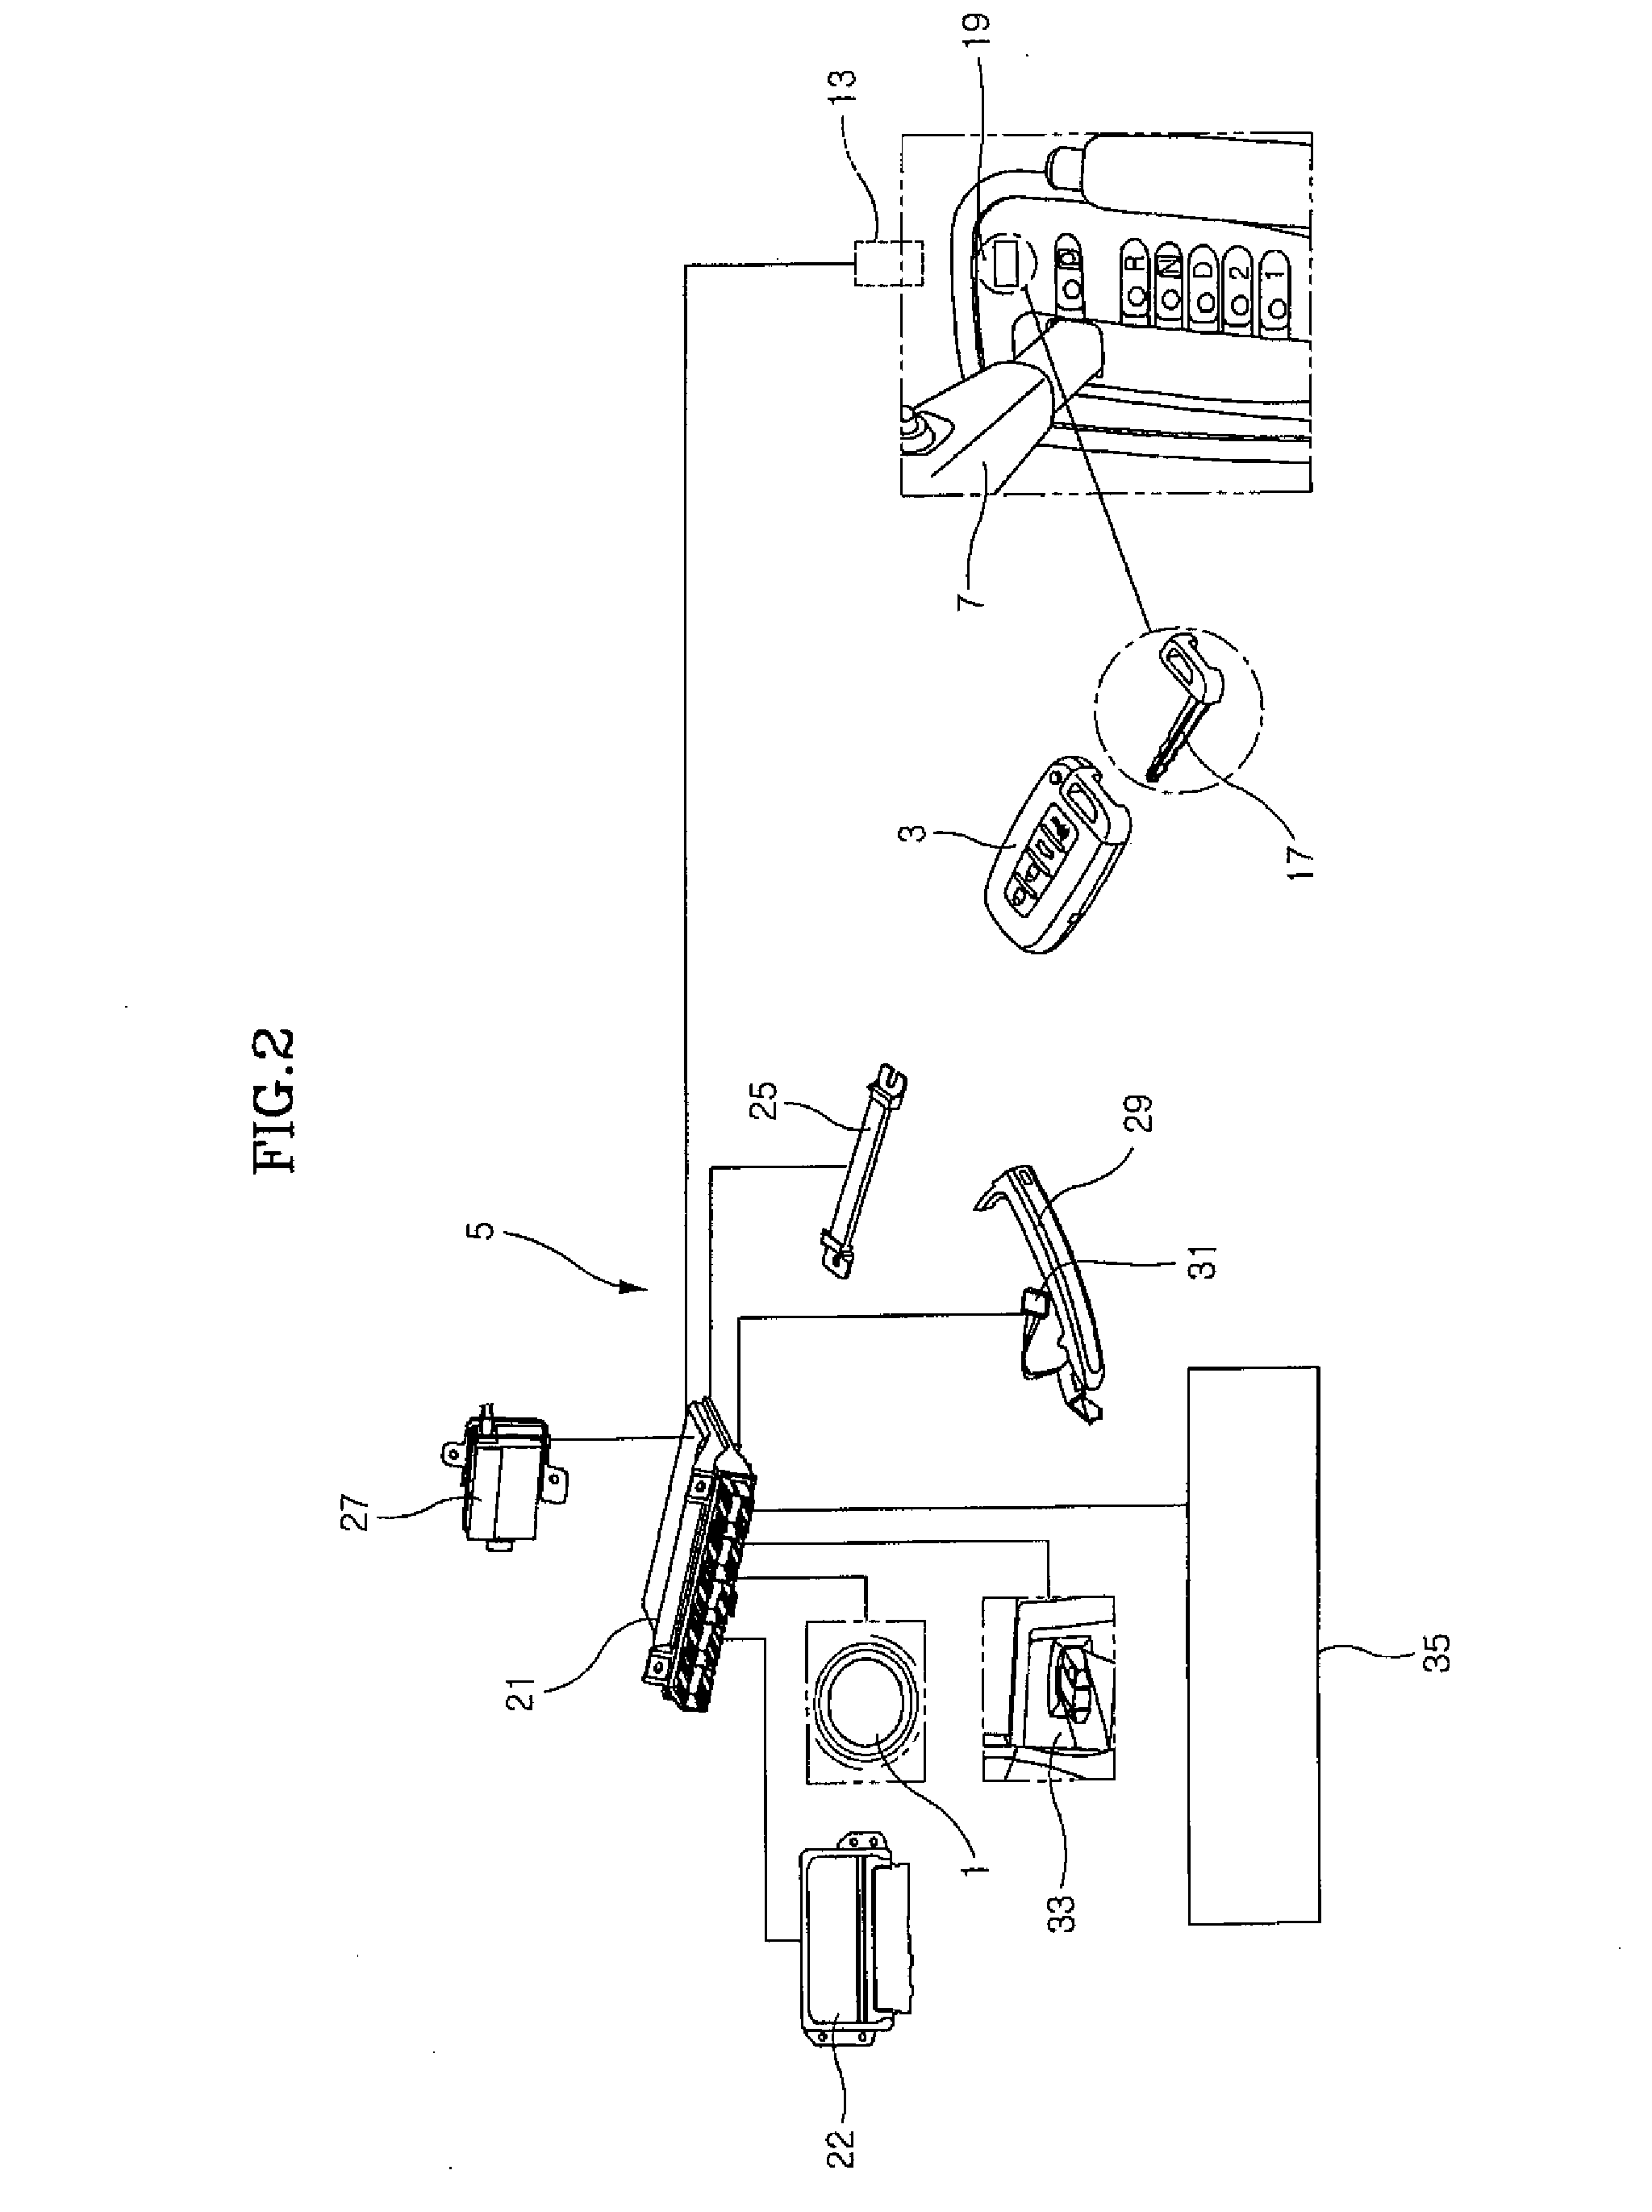 Mechanism for locking shift lever of vehicle equipped with smart key system